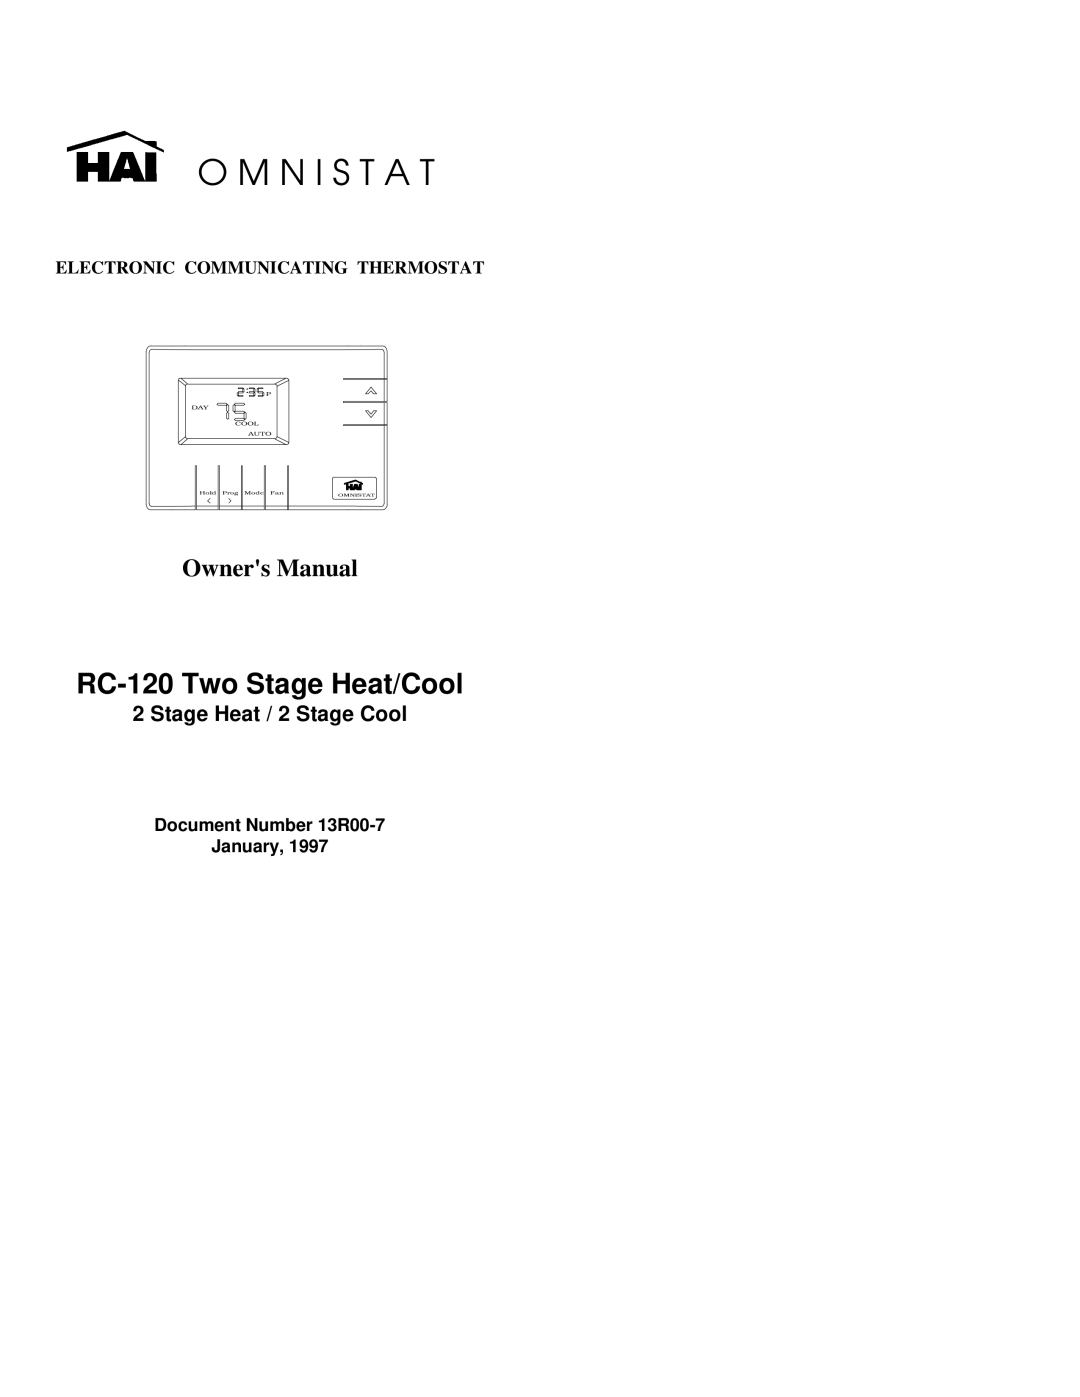 Home Automation owner manual O M N I S T A T, RC-120Two Stage Heat/Cool, Stage Heat / 2 Stage Cool, Day Cool Auto 